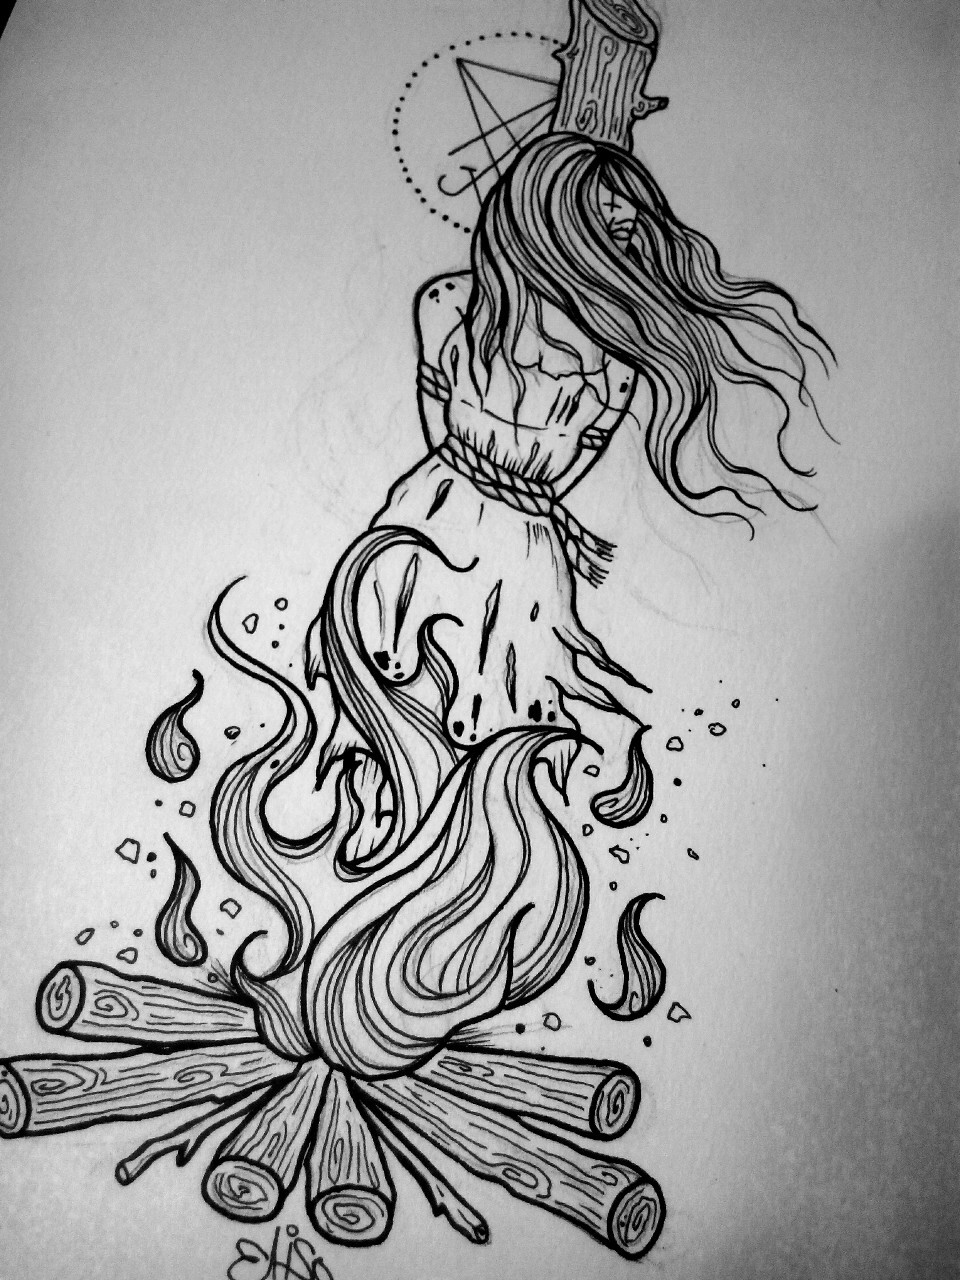 elisadevihate Burning witch You can find  Black Onyx Tattoo Studio